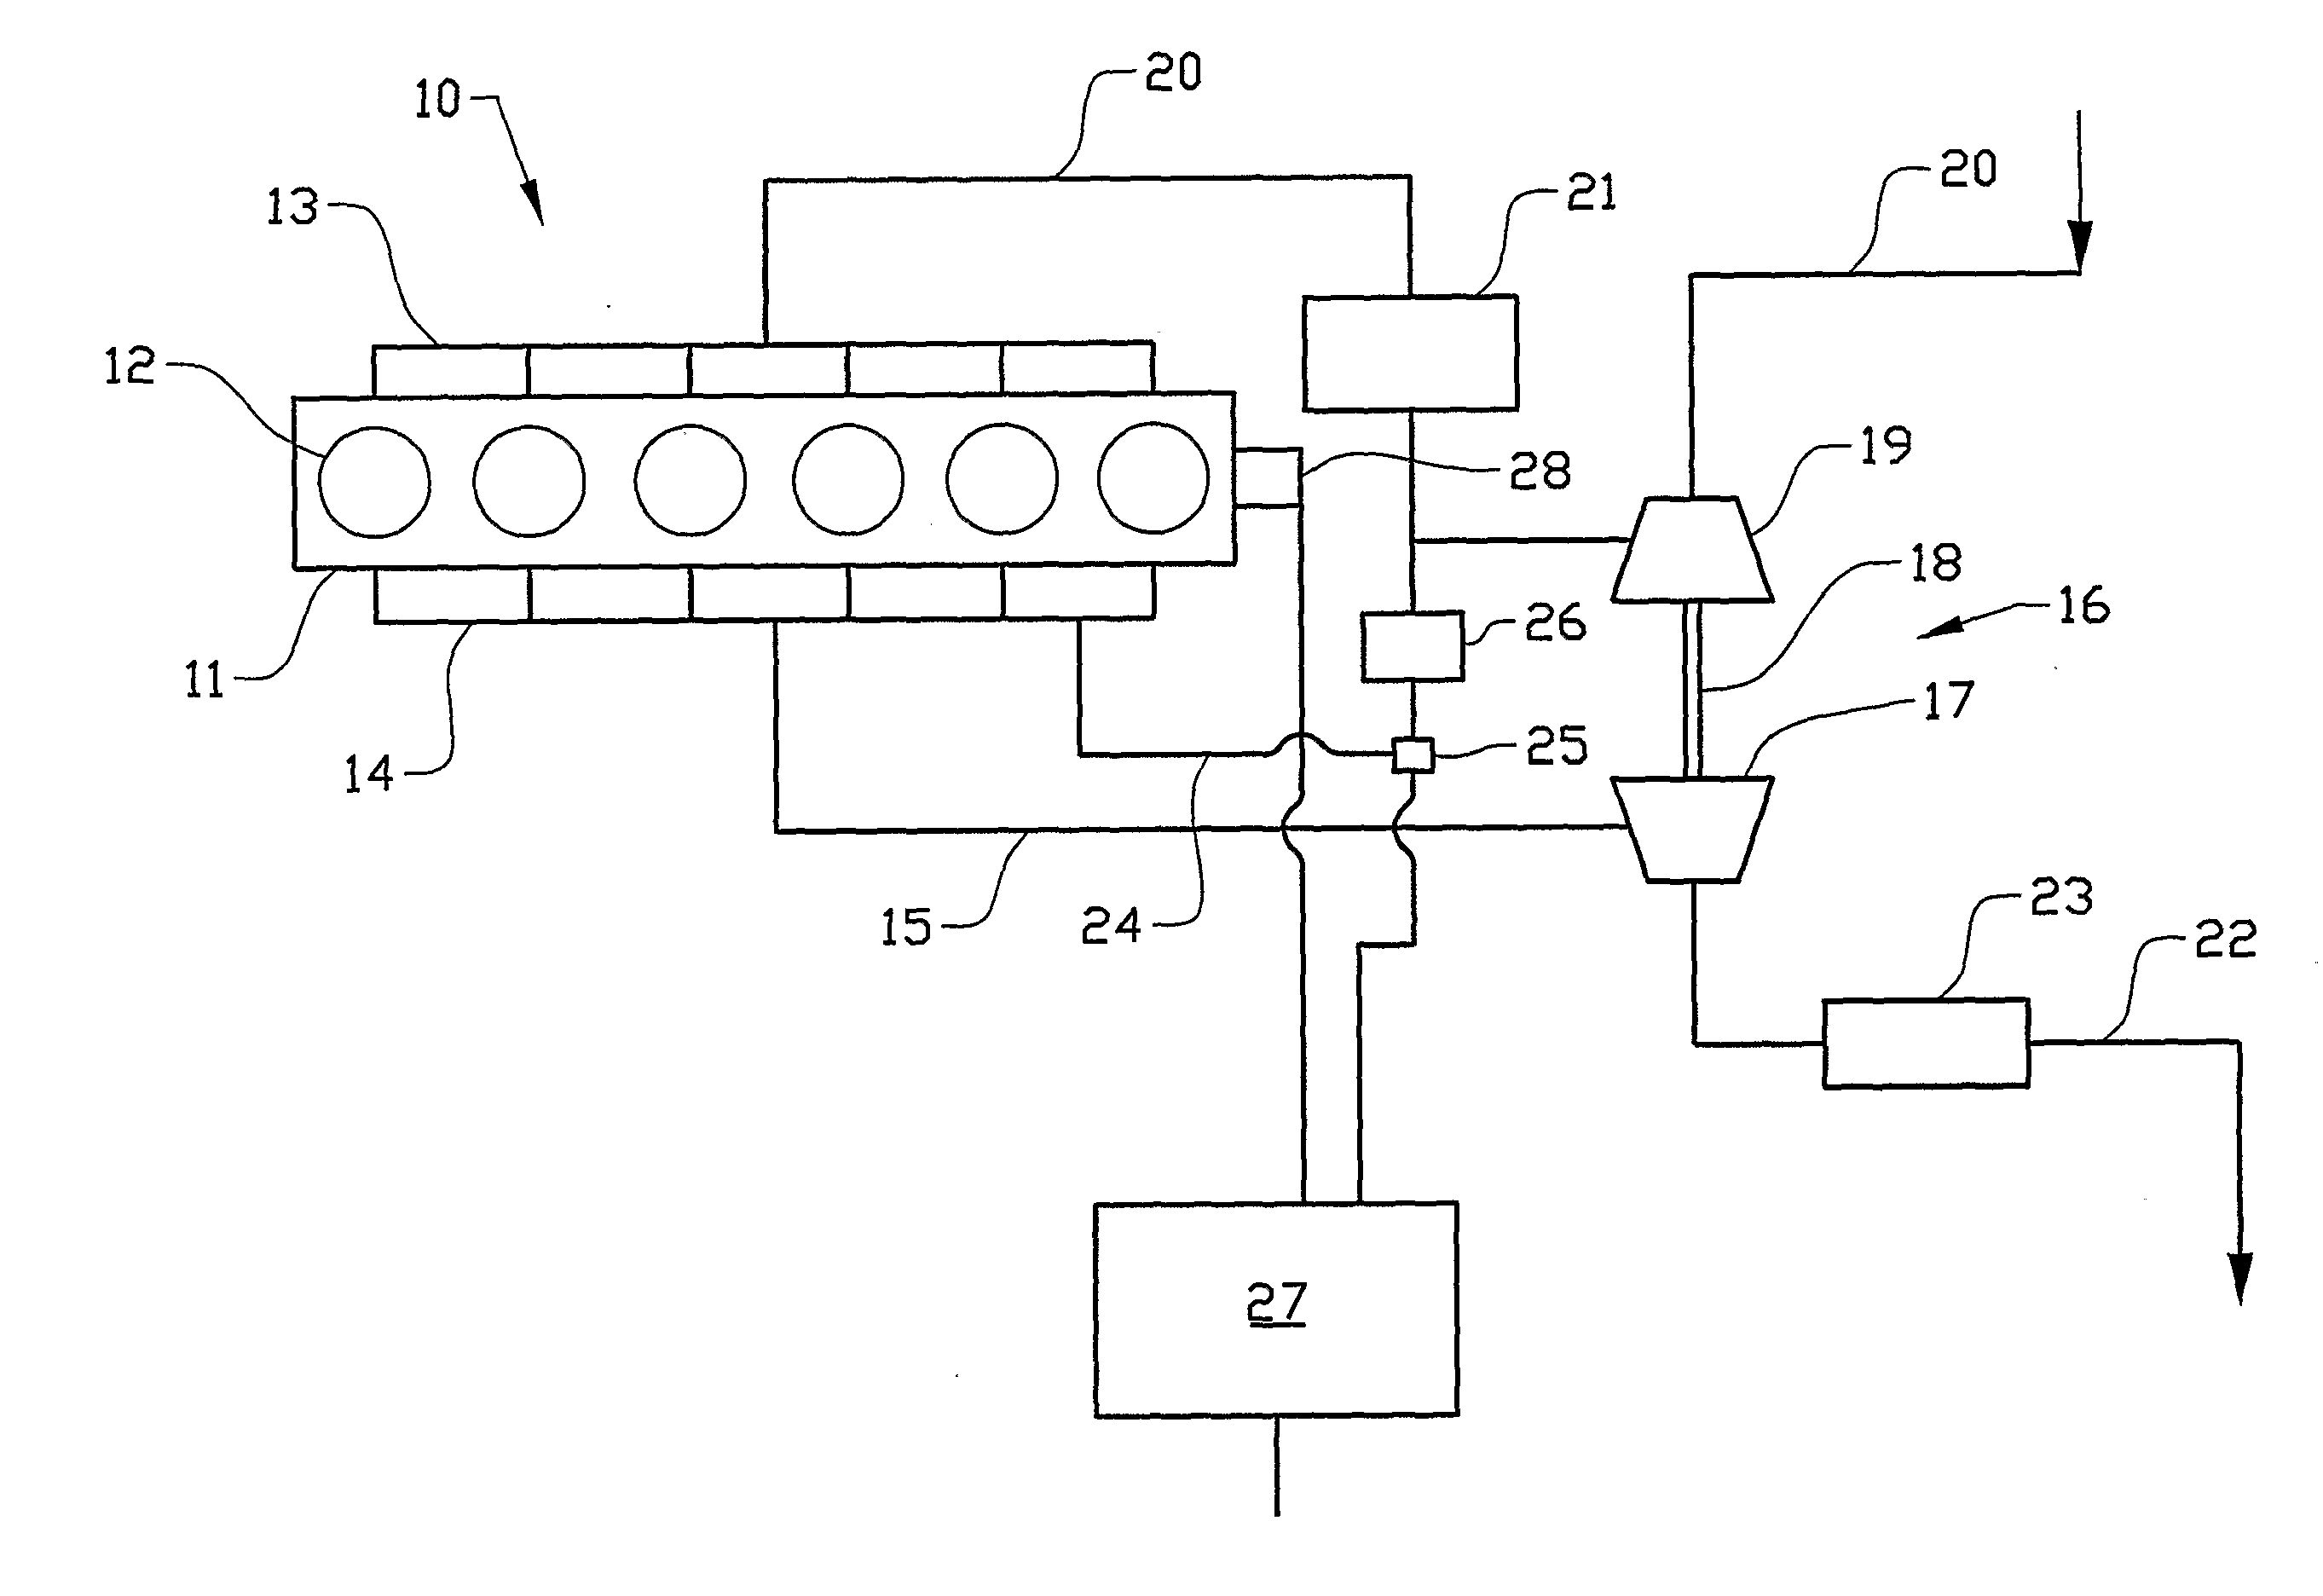 Arrangement For Controlling Exhaust Pressure Pulses At An Internal Combustion Engine